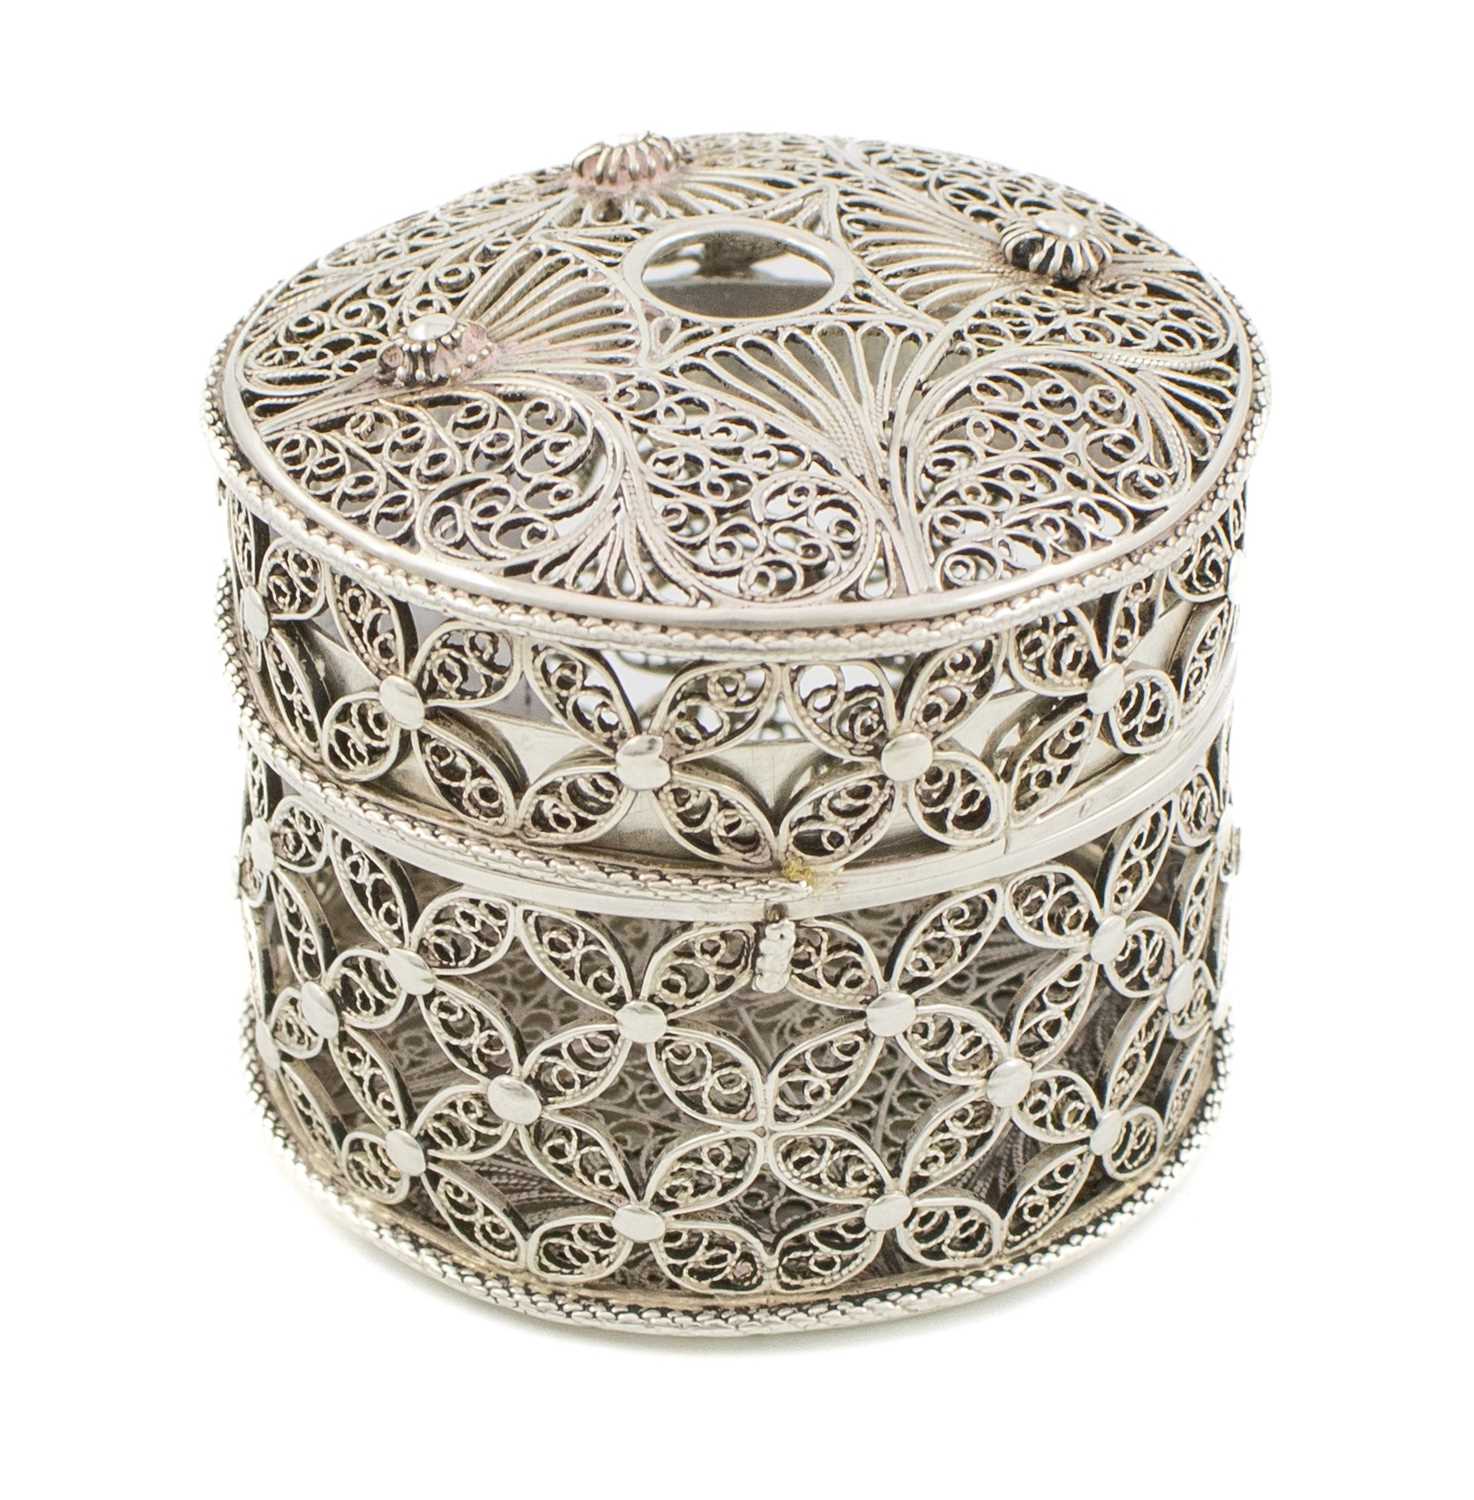 A silver filigree bougie box, unmarked, probably 19th century, cylindrical form, pull-off cover with